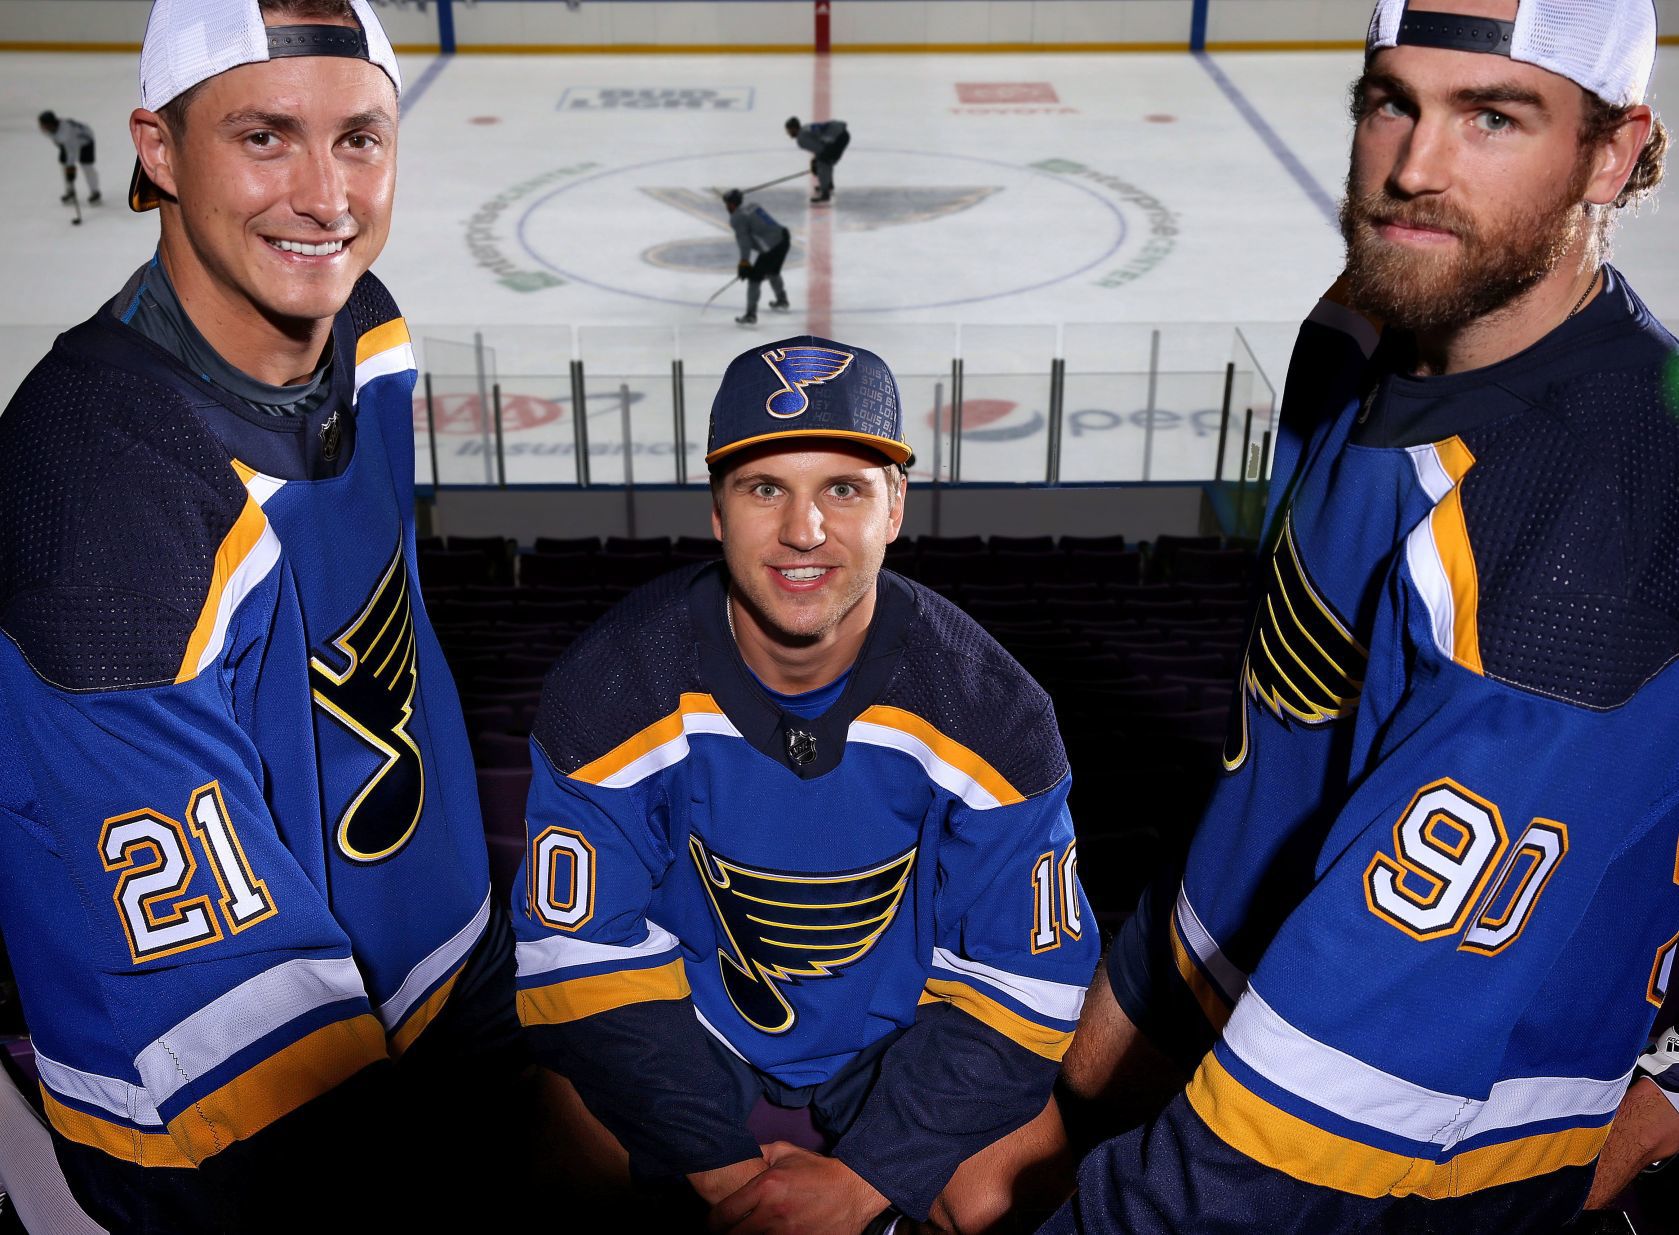 st louis nhl roster